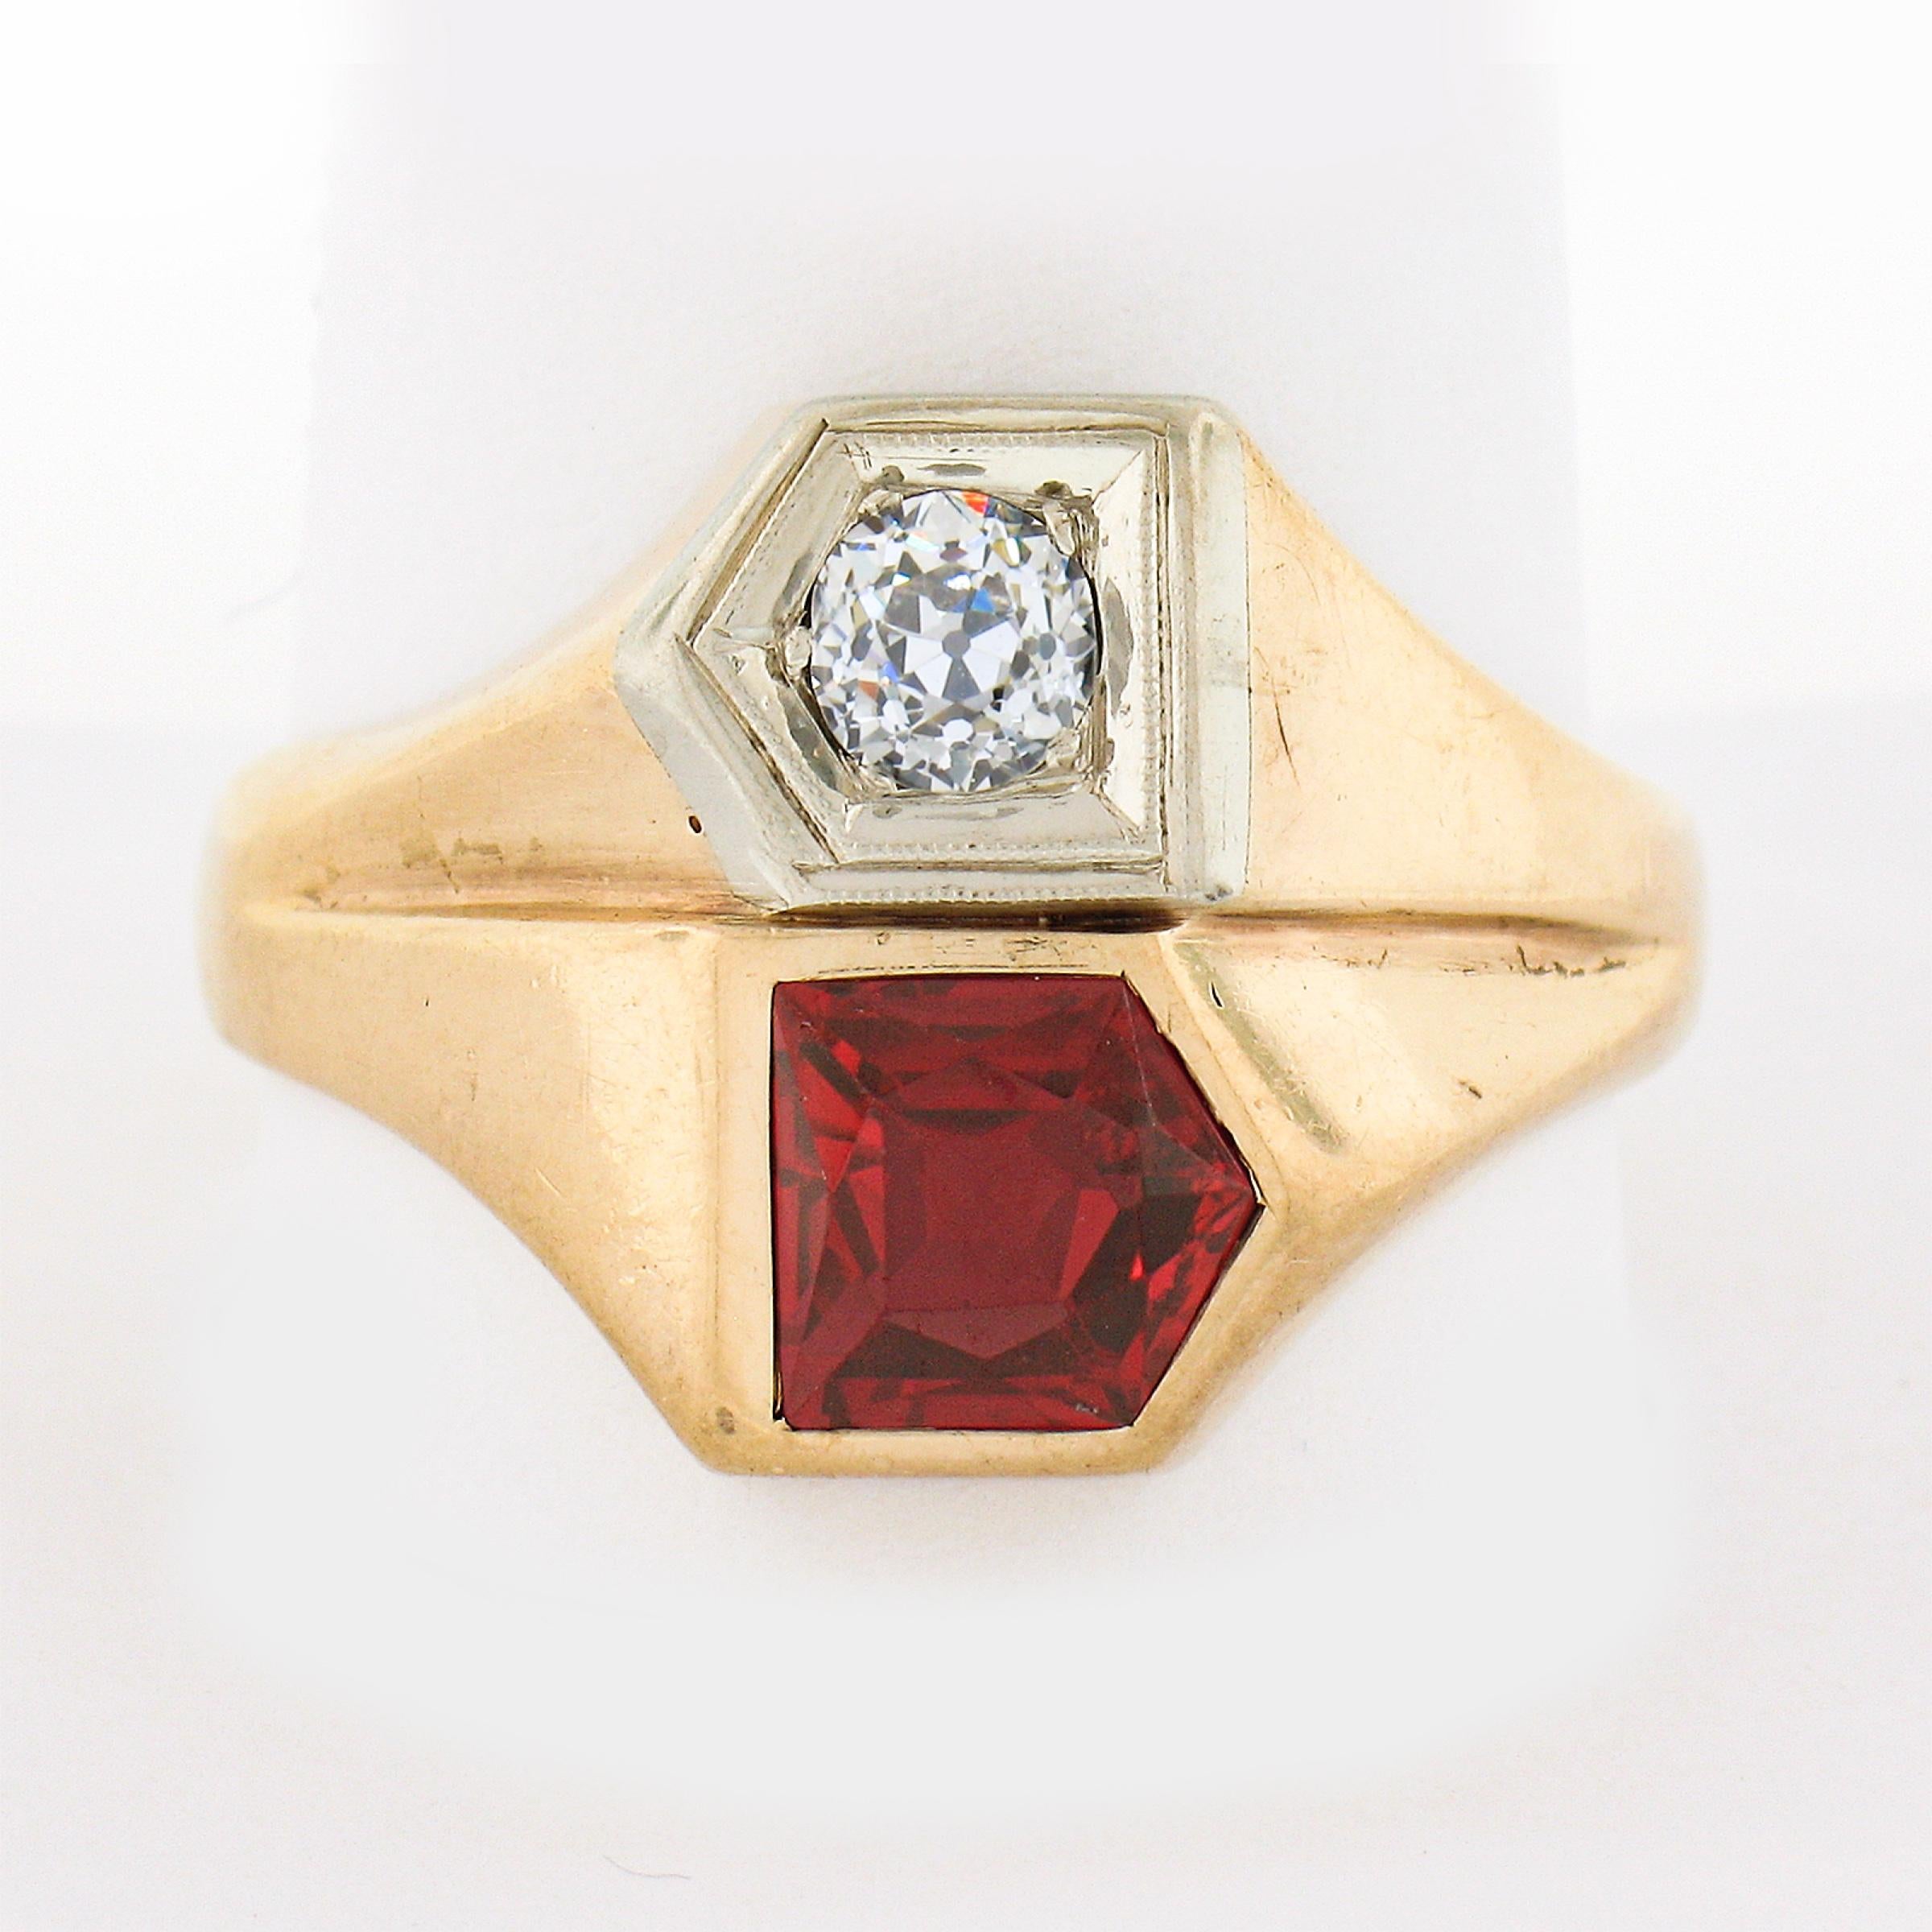 This men's retro vintage ring is crafted in solid 14k yellow gold and features a very fine quality diamond and synthetic ruby neatly set at its top. The stunning diamond is old European cut and is neatly ave set in solid white gold. It weighs